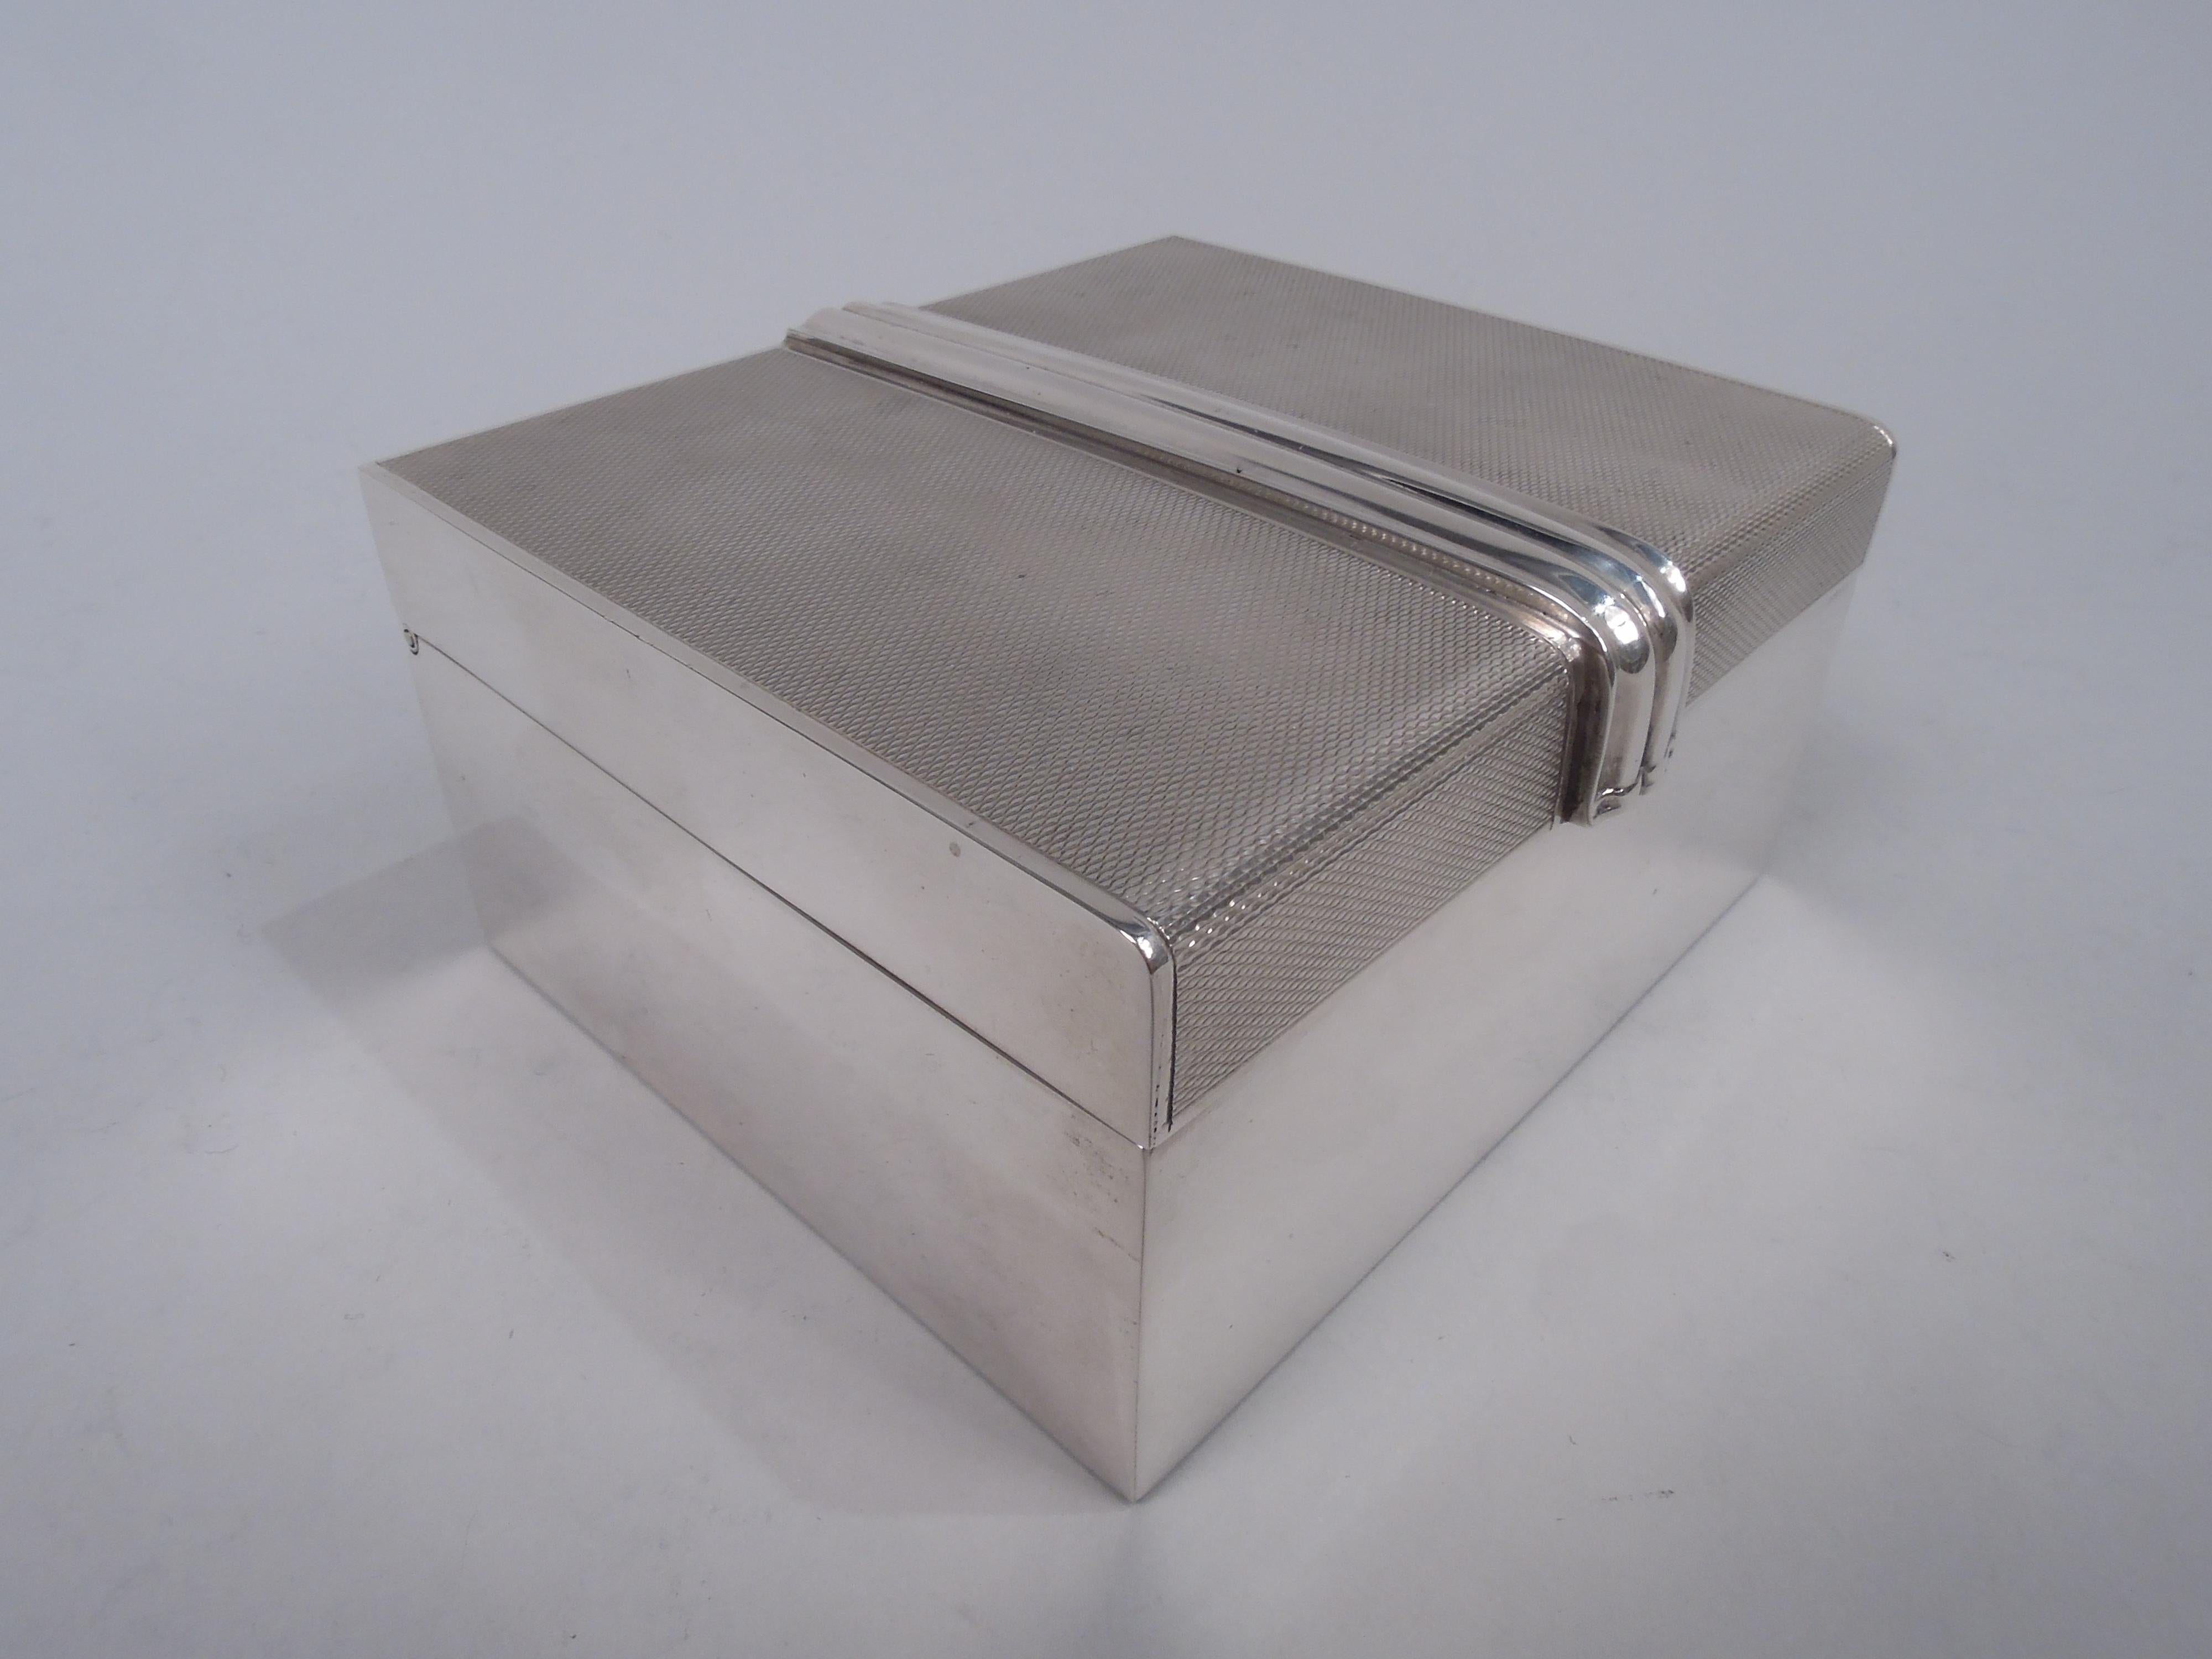 Snazzy Art Deco sterling silver box. Made by William Suckling in Birmingham in 1951. Rectangular with straight and plain sides. Cover hinged with plain sides and back. Top and front have allover engine-turned ground and are bisected by applied